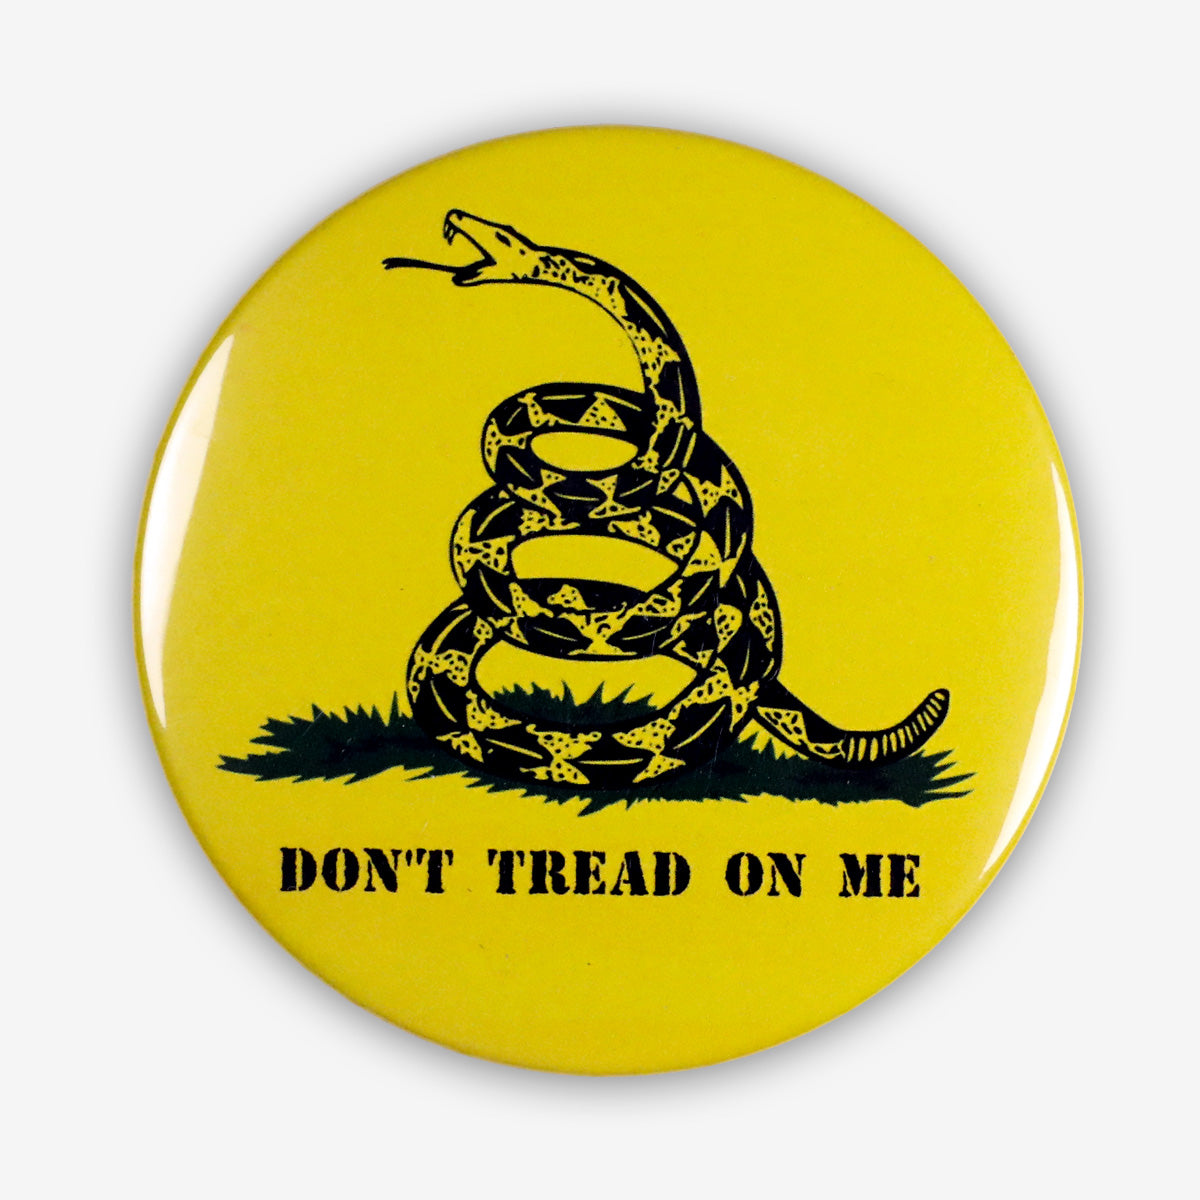 Don't Tread on Me Button